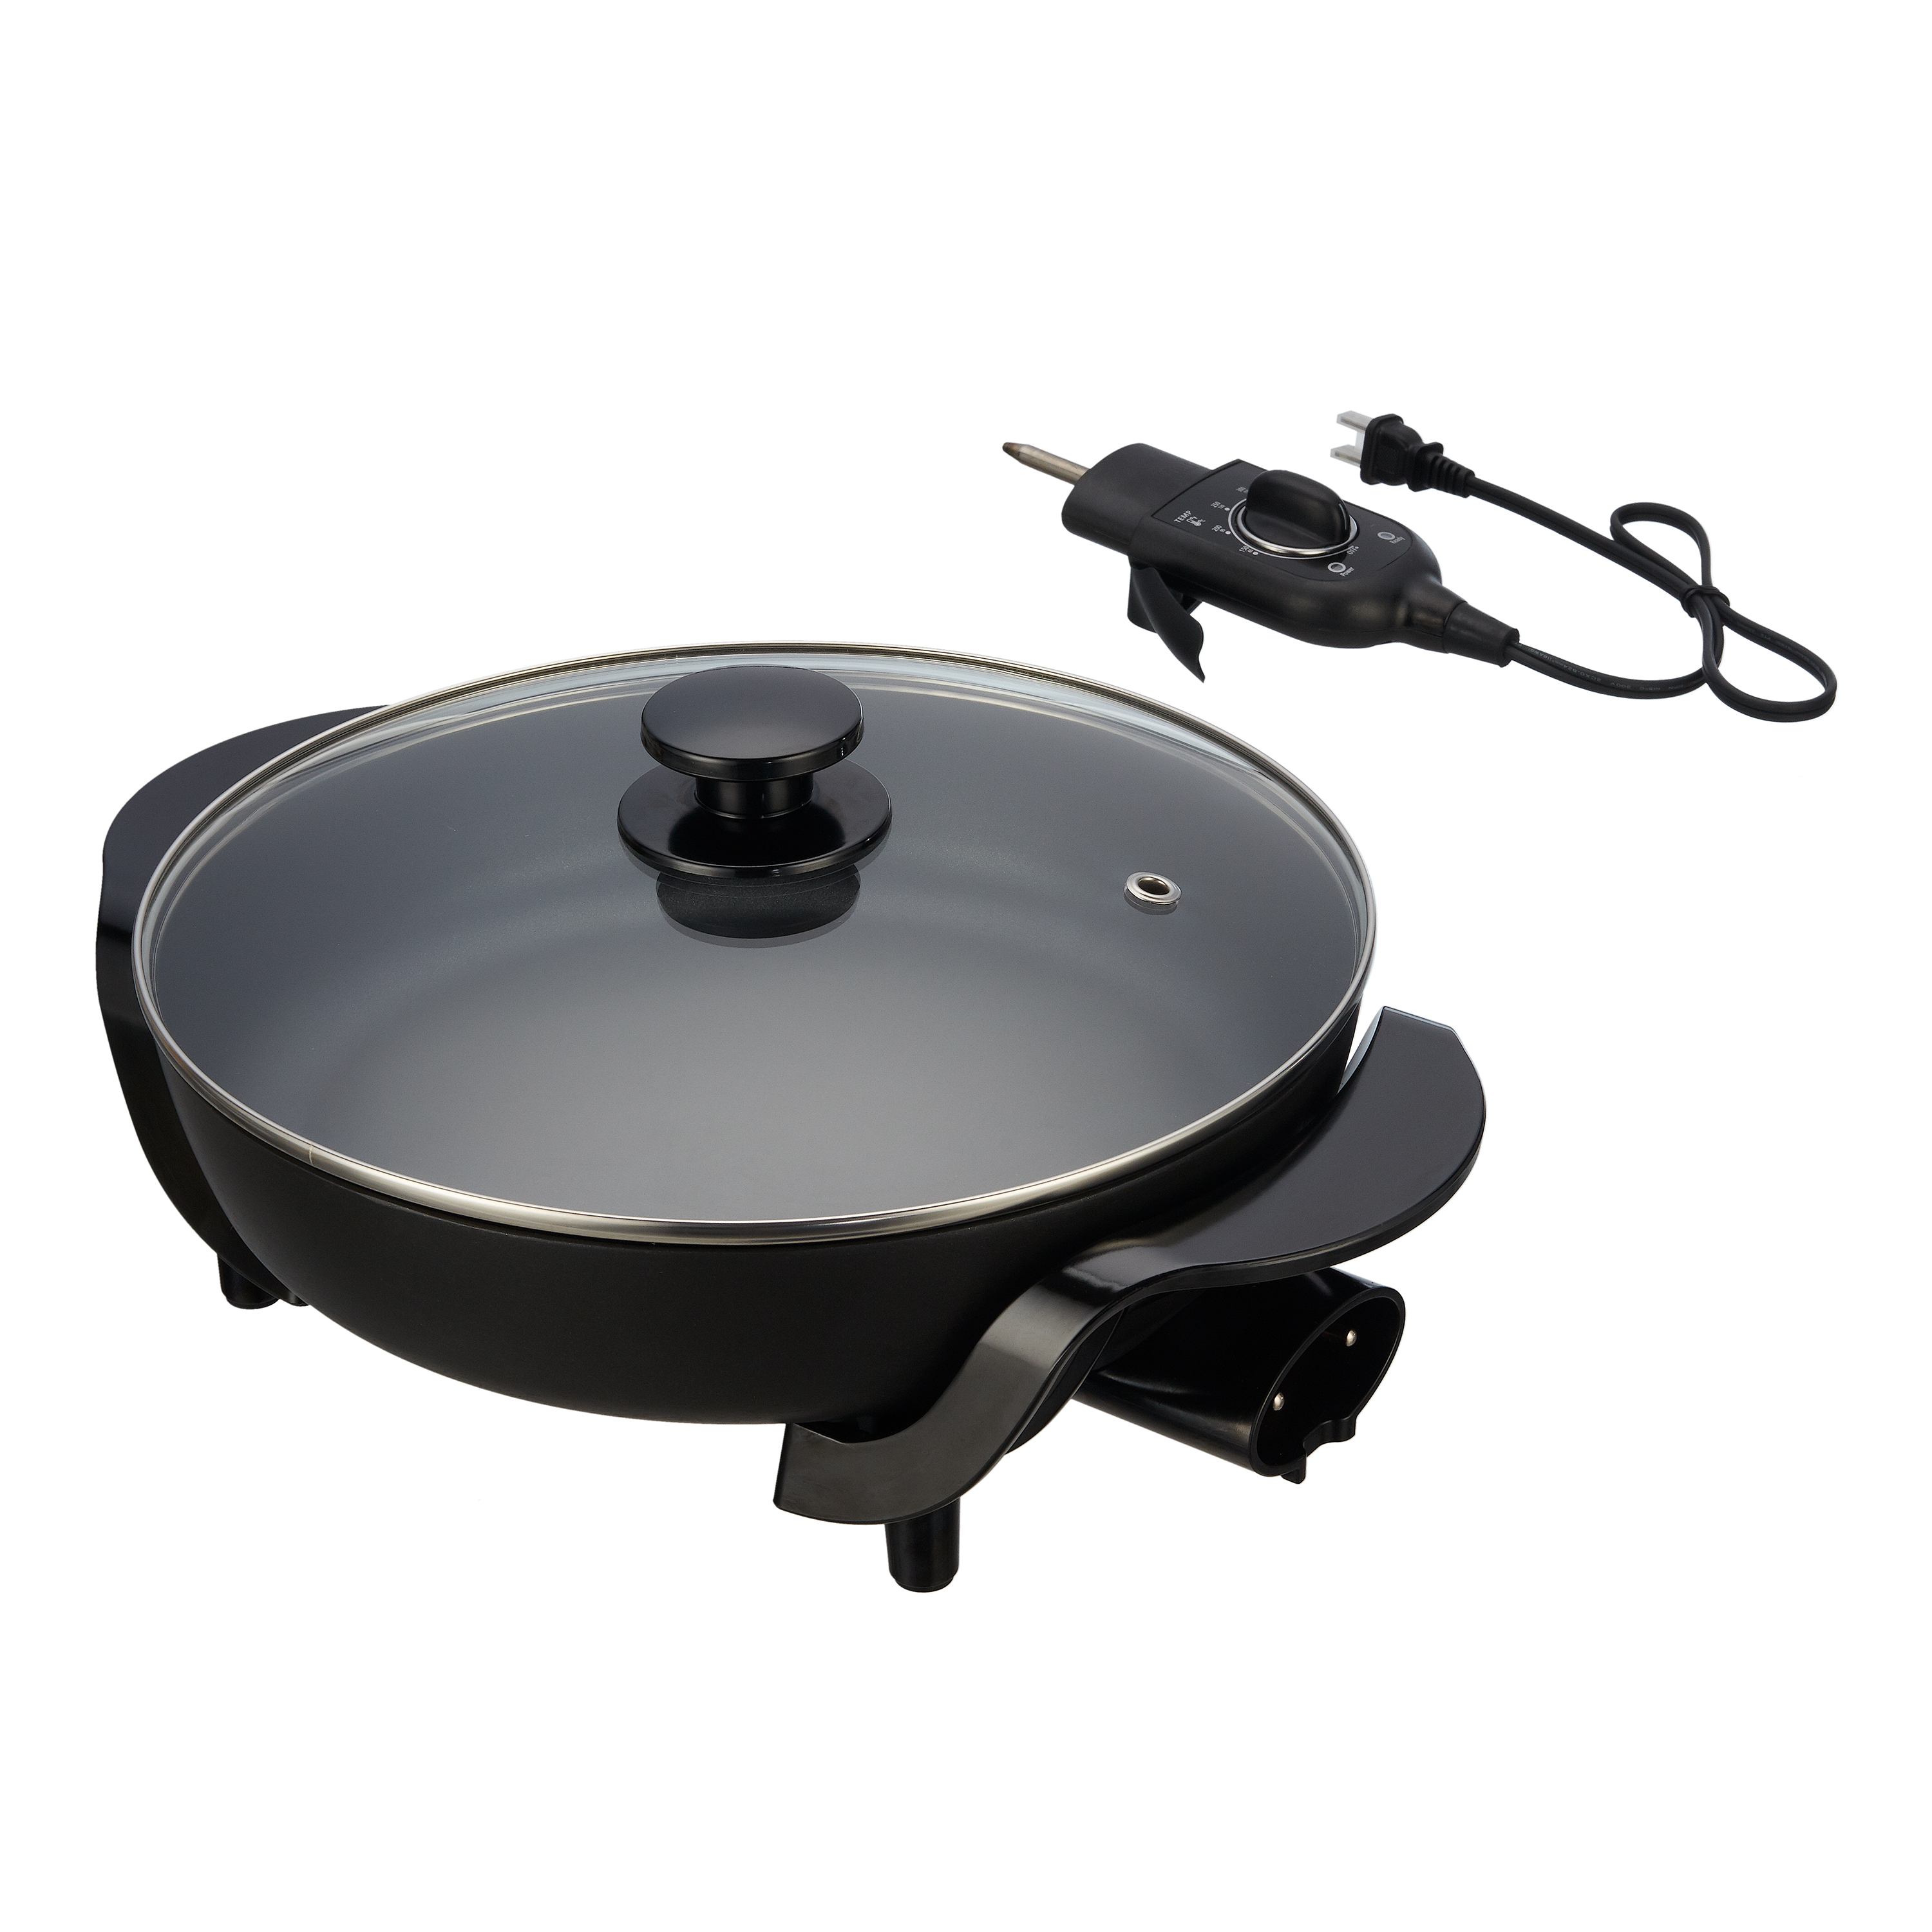 Mainstays 12" Round Nonstick Electric Skillet with Tempered Glass Cover, Mainstays Black - image 1 of 4